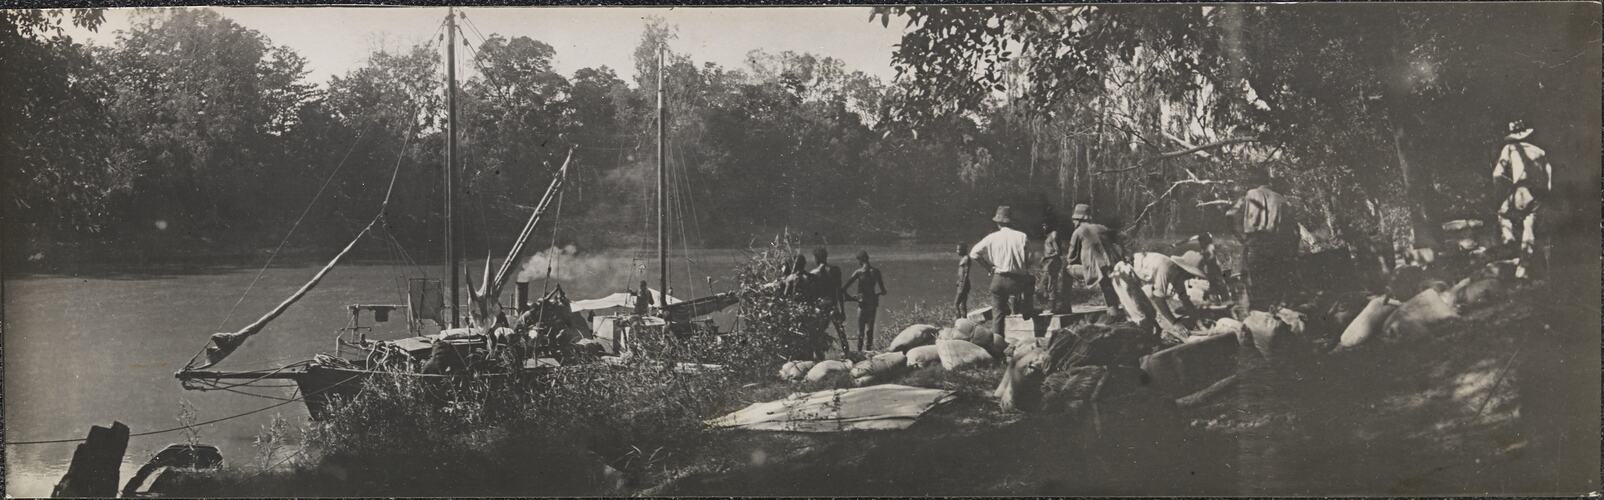 Unloading supplies, Daly River, Northern Territory, Australia, 1912.